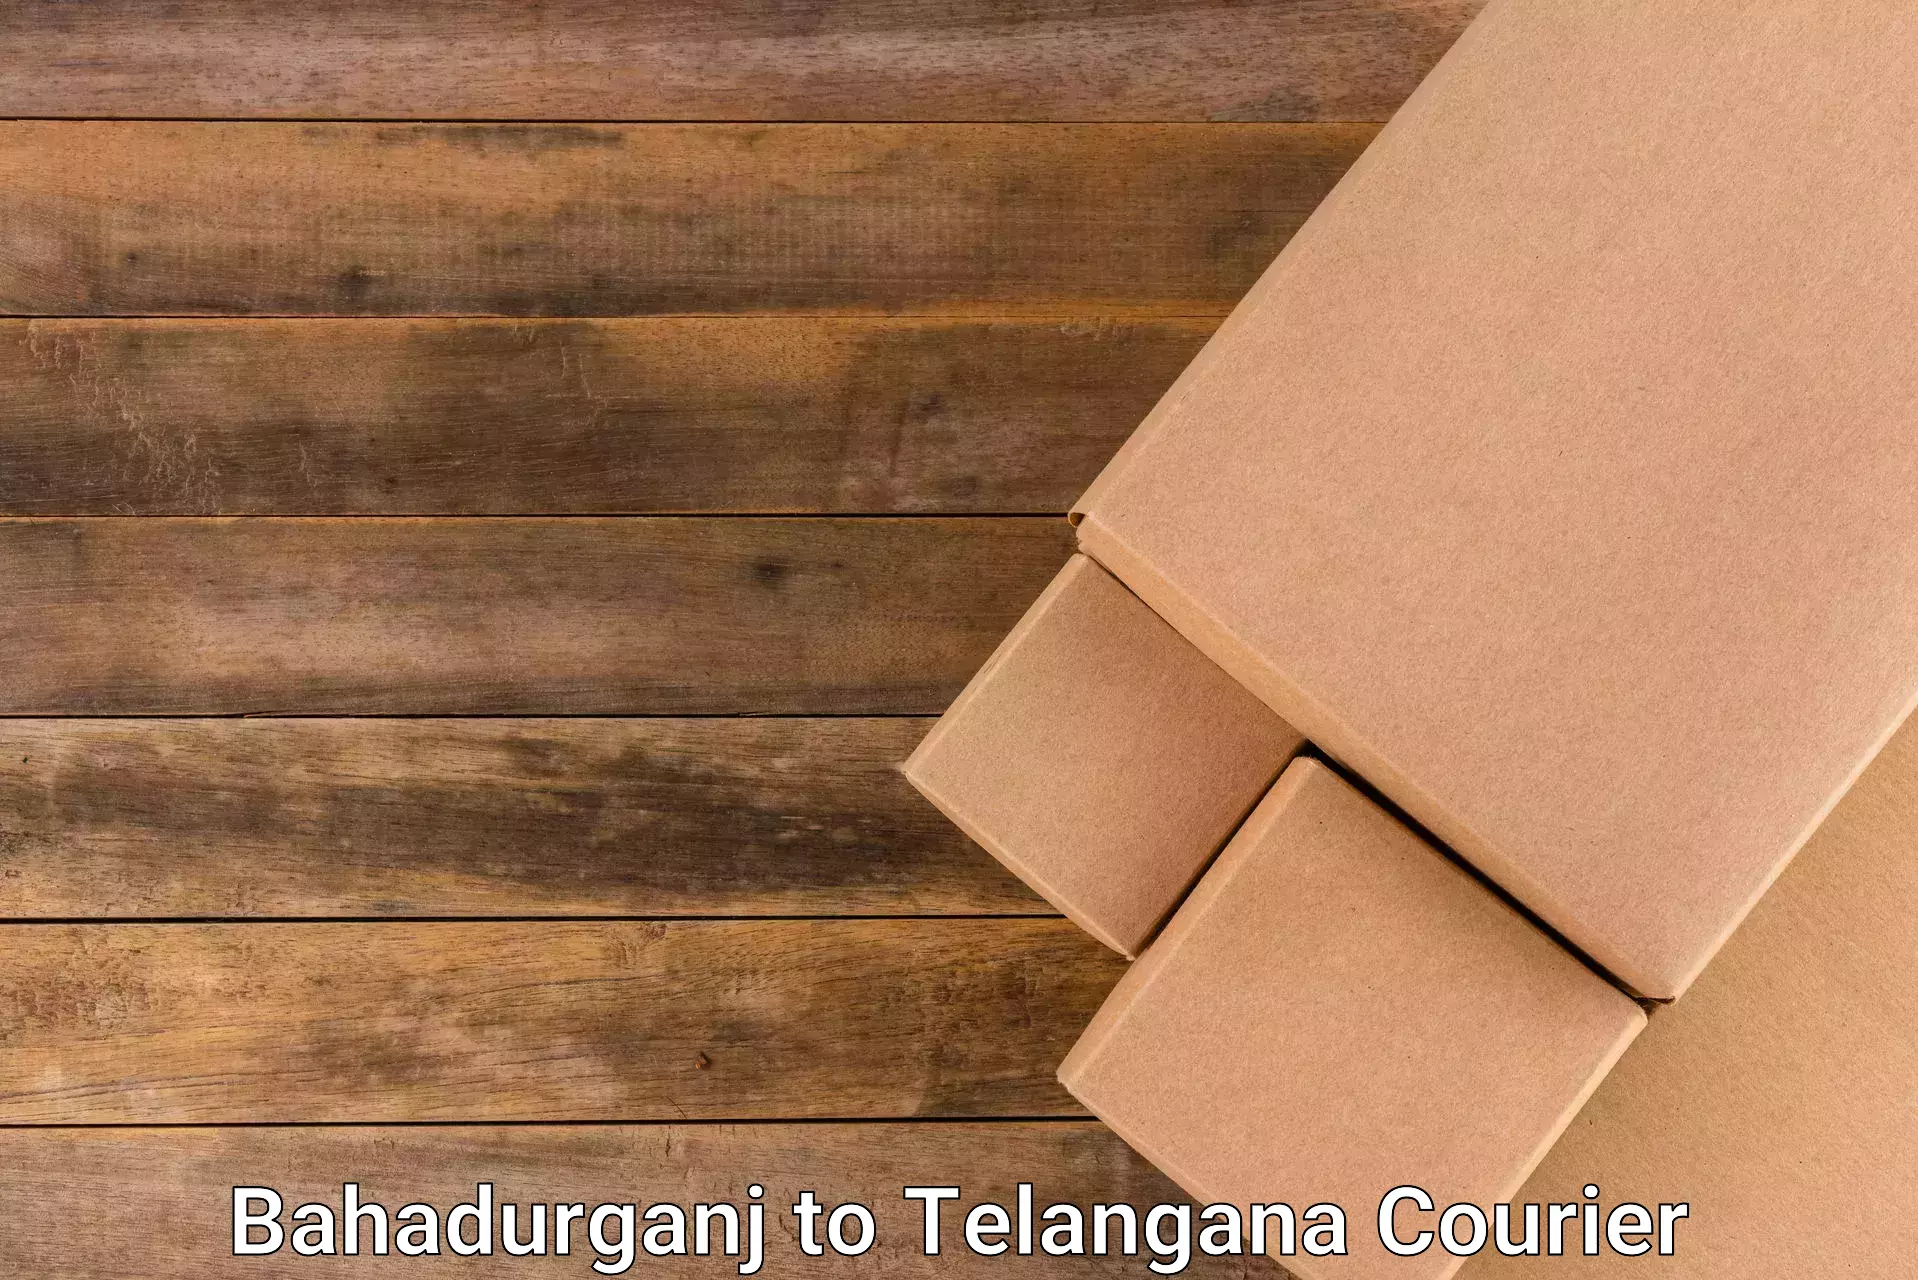 Courier service booking Bahadurganj to Sultanabad